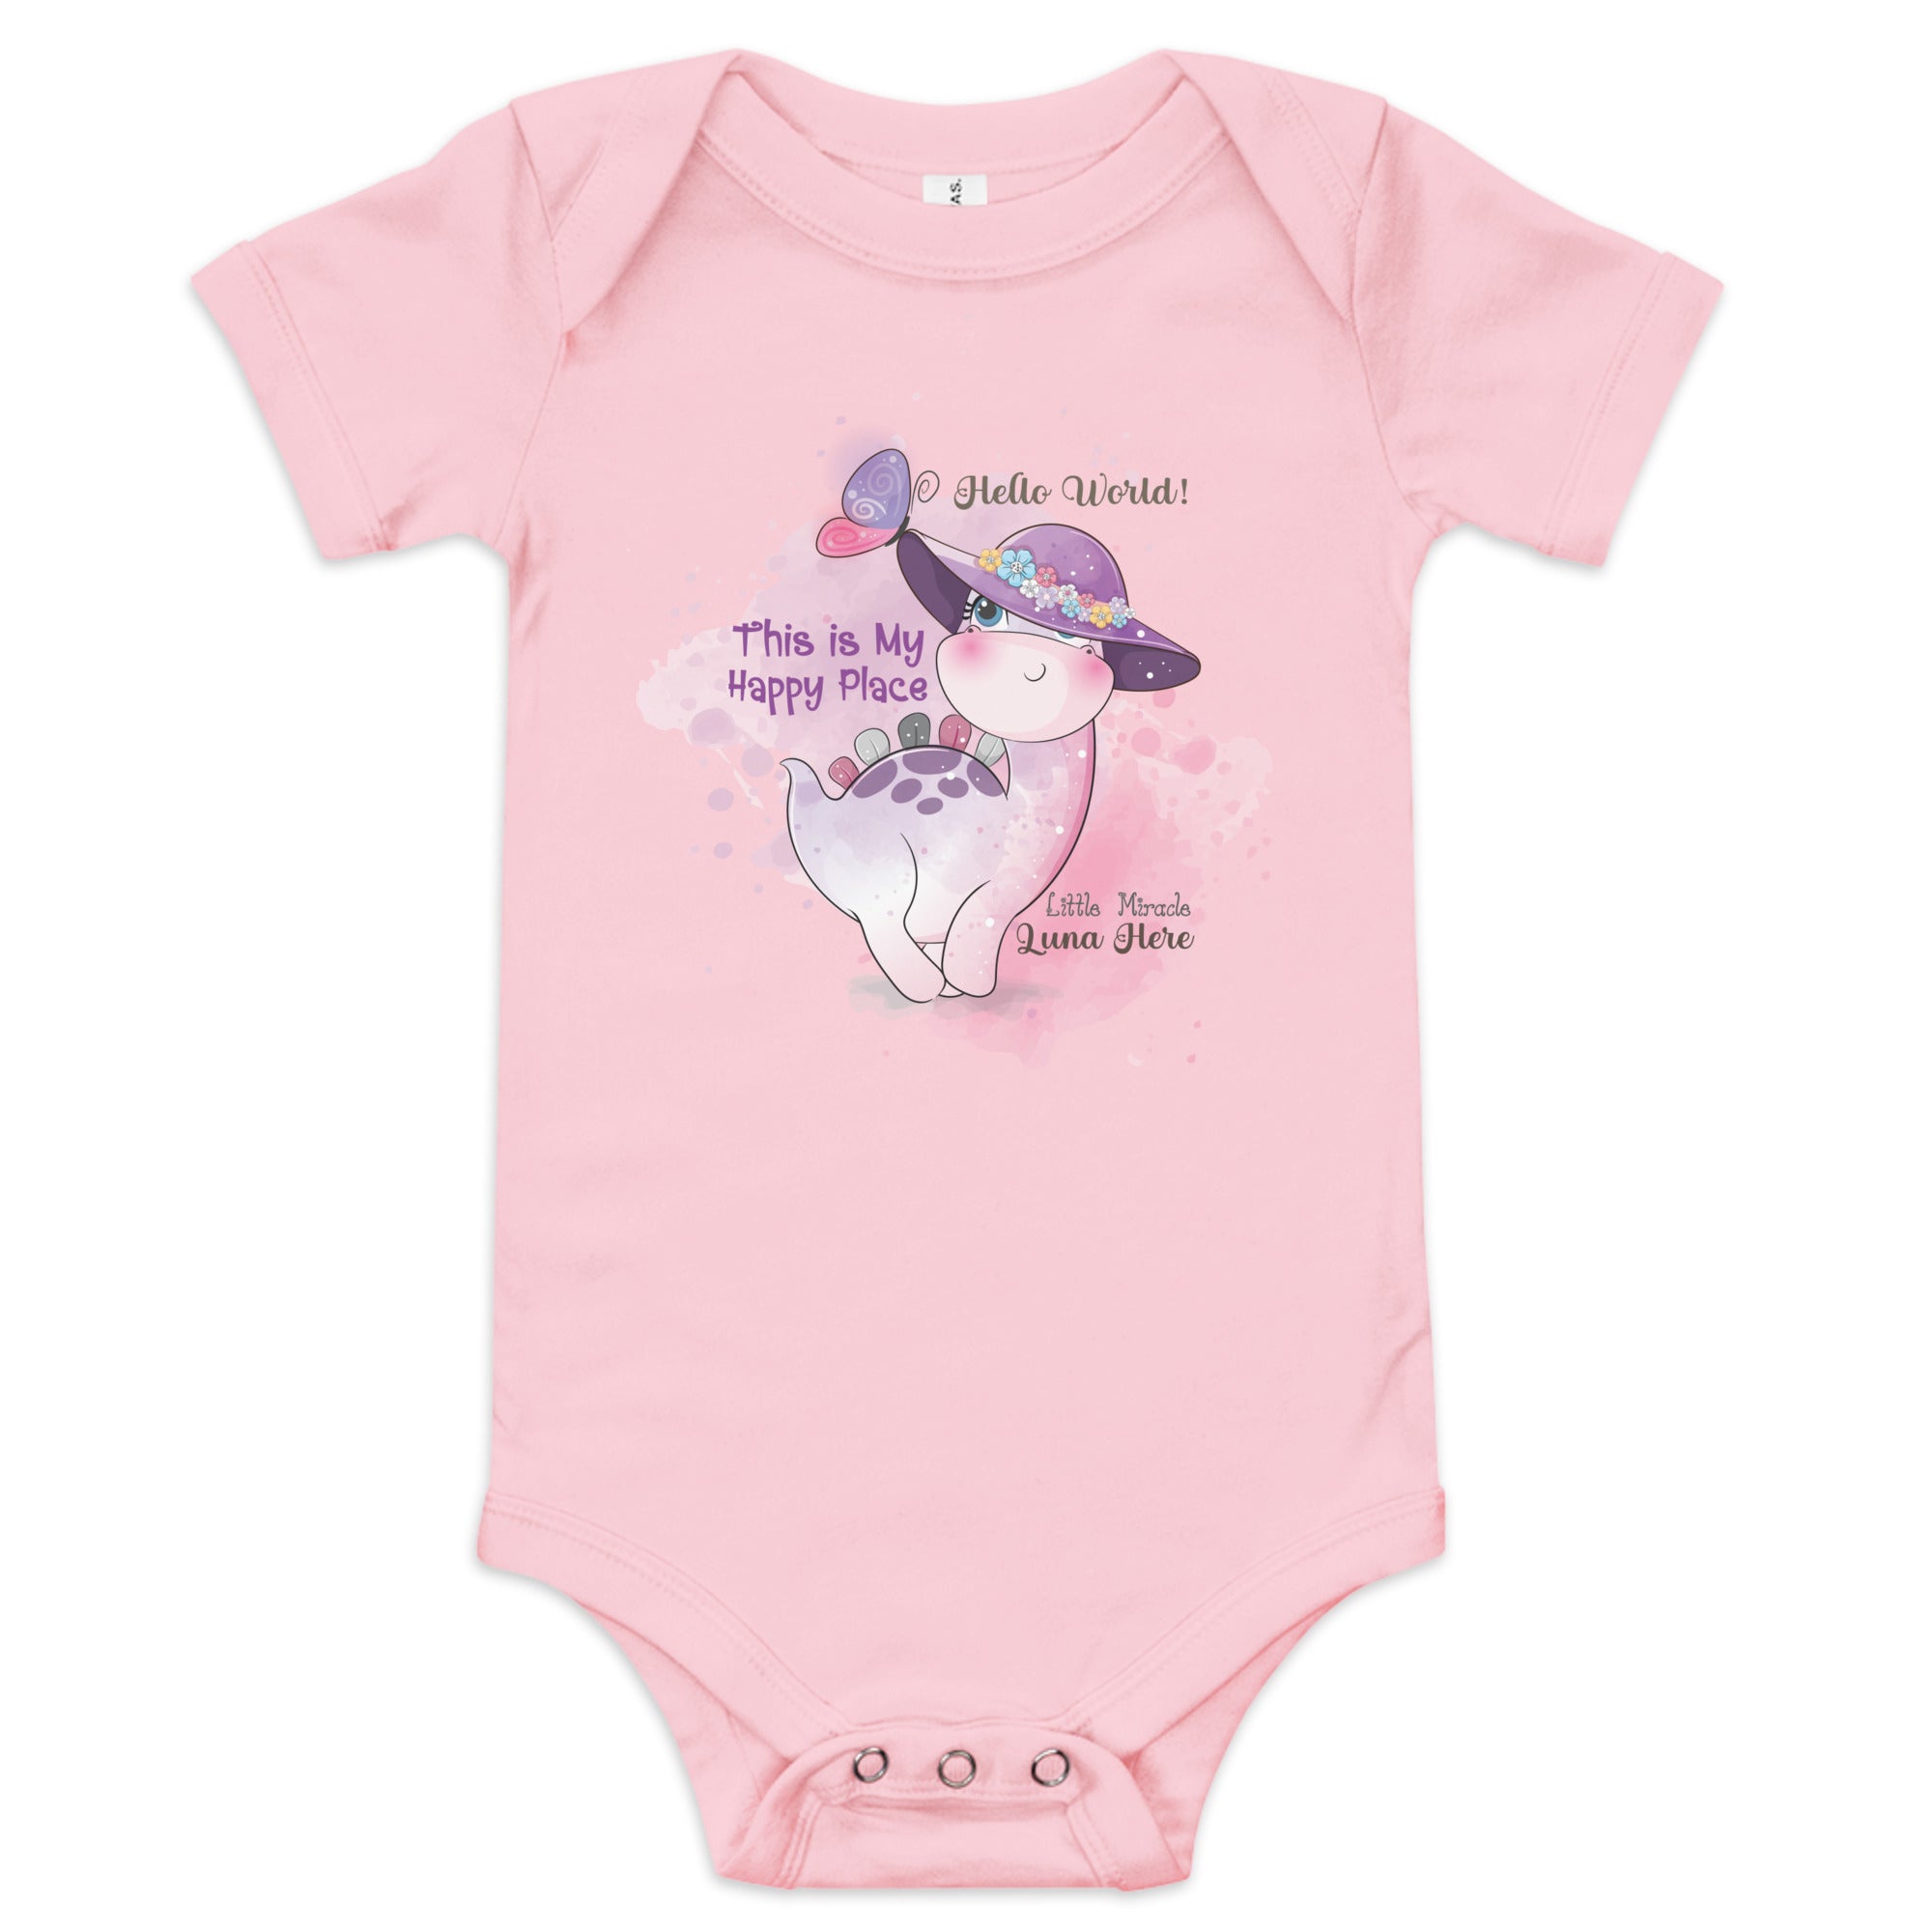 Toddler Clothes, Baby Shower Gifts, Baby Announcement Ideas